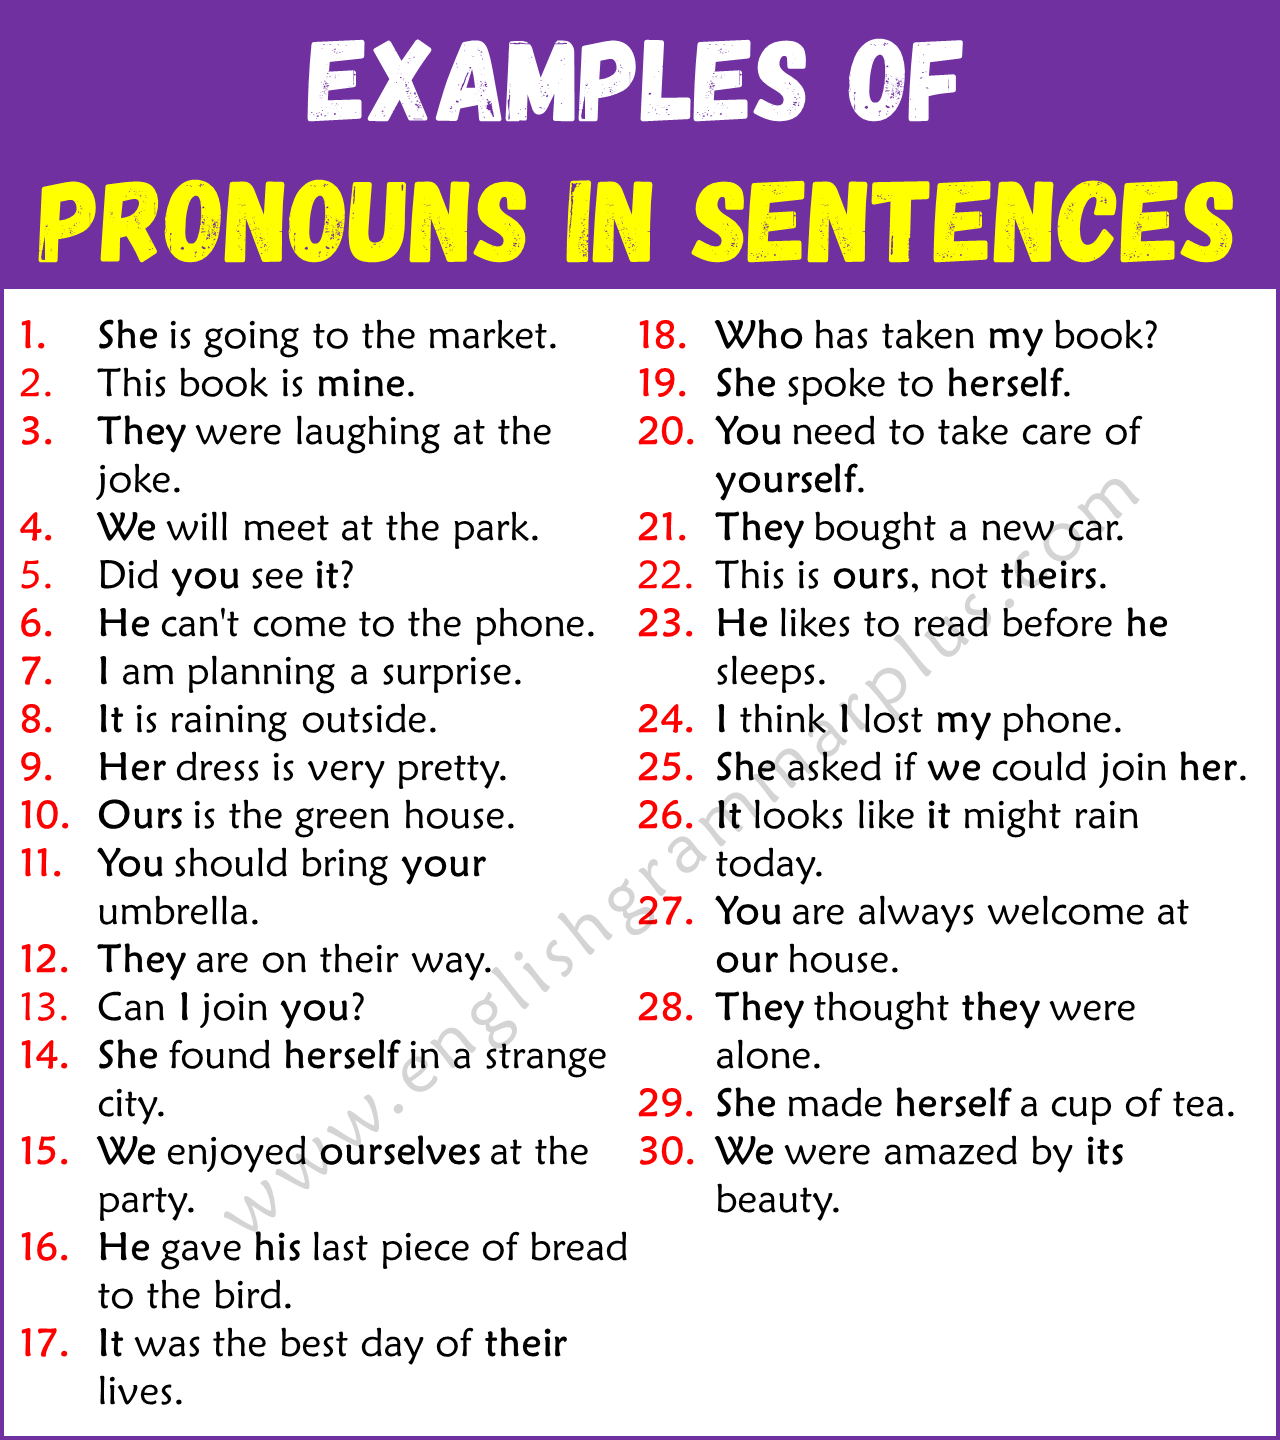 Examples of Pronouns in Sentences